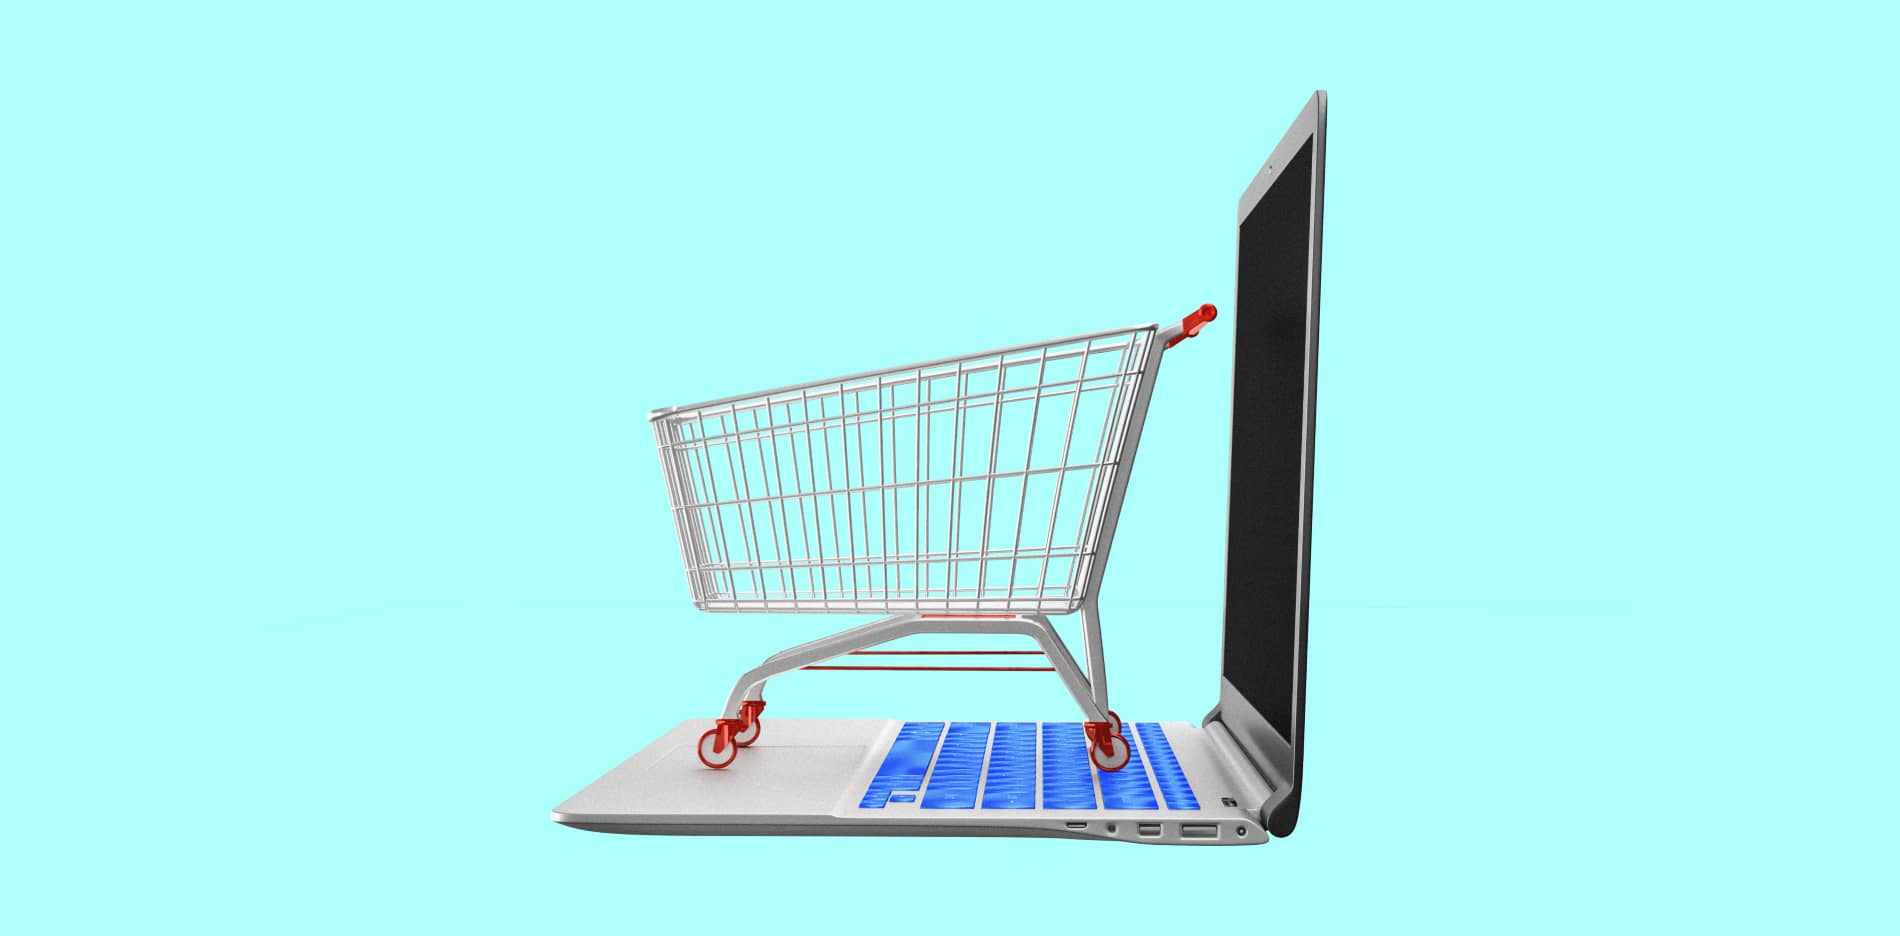 Ecommerce Digital Transformation: A Full Retail & Ecommerce Business Guide